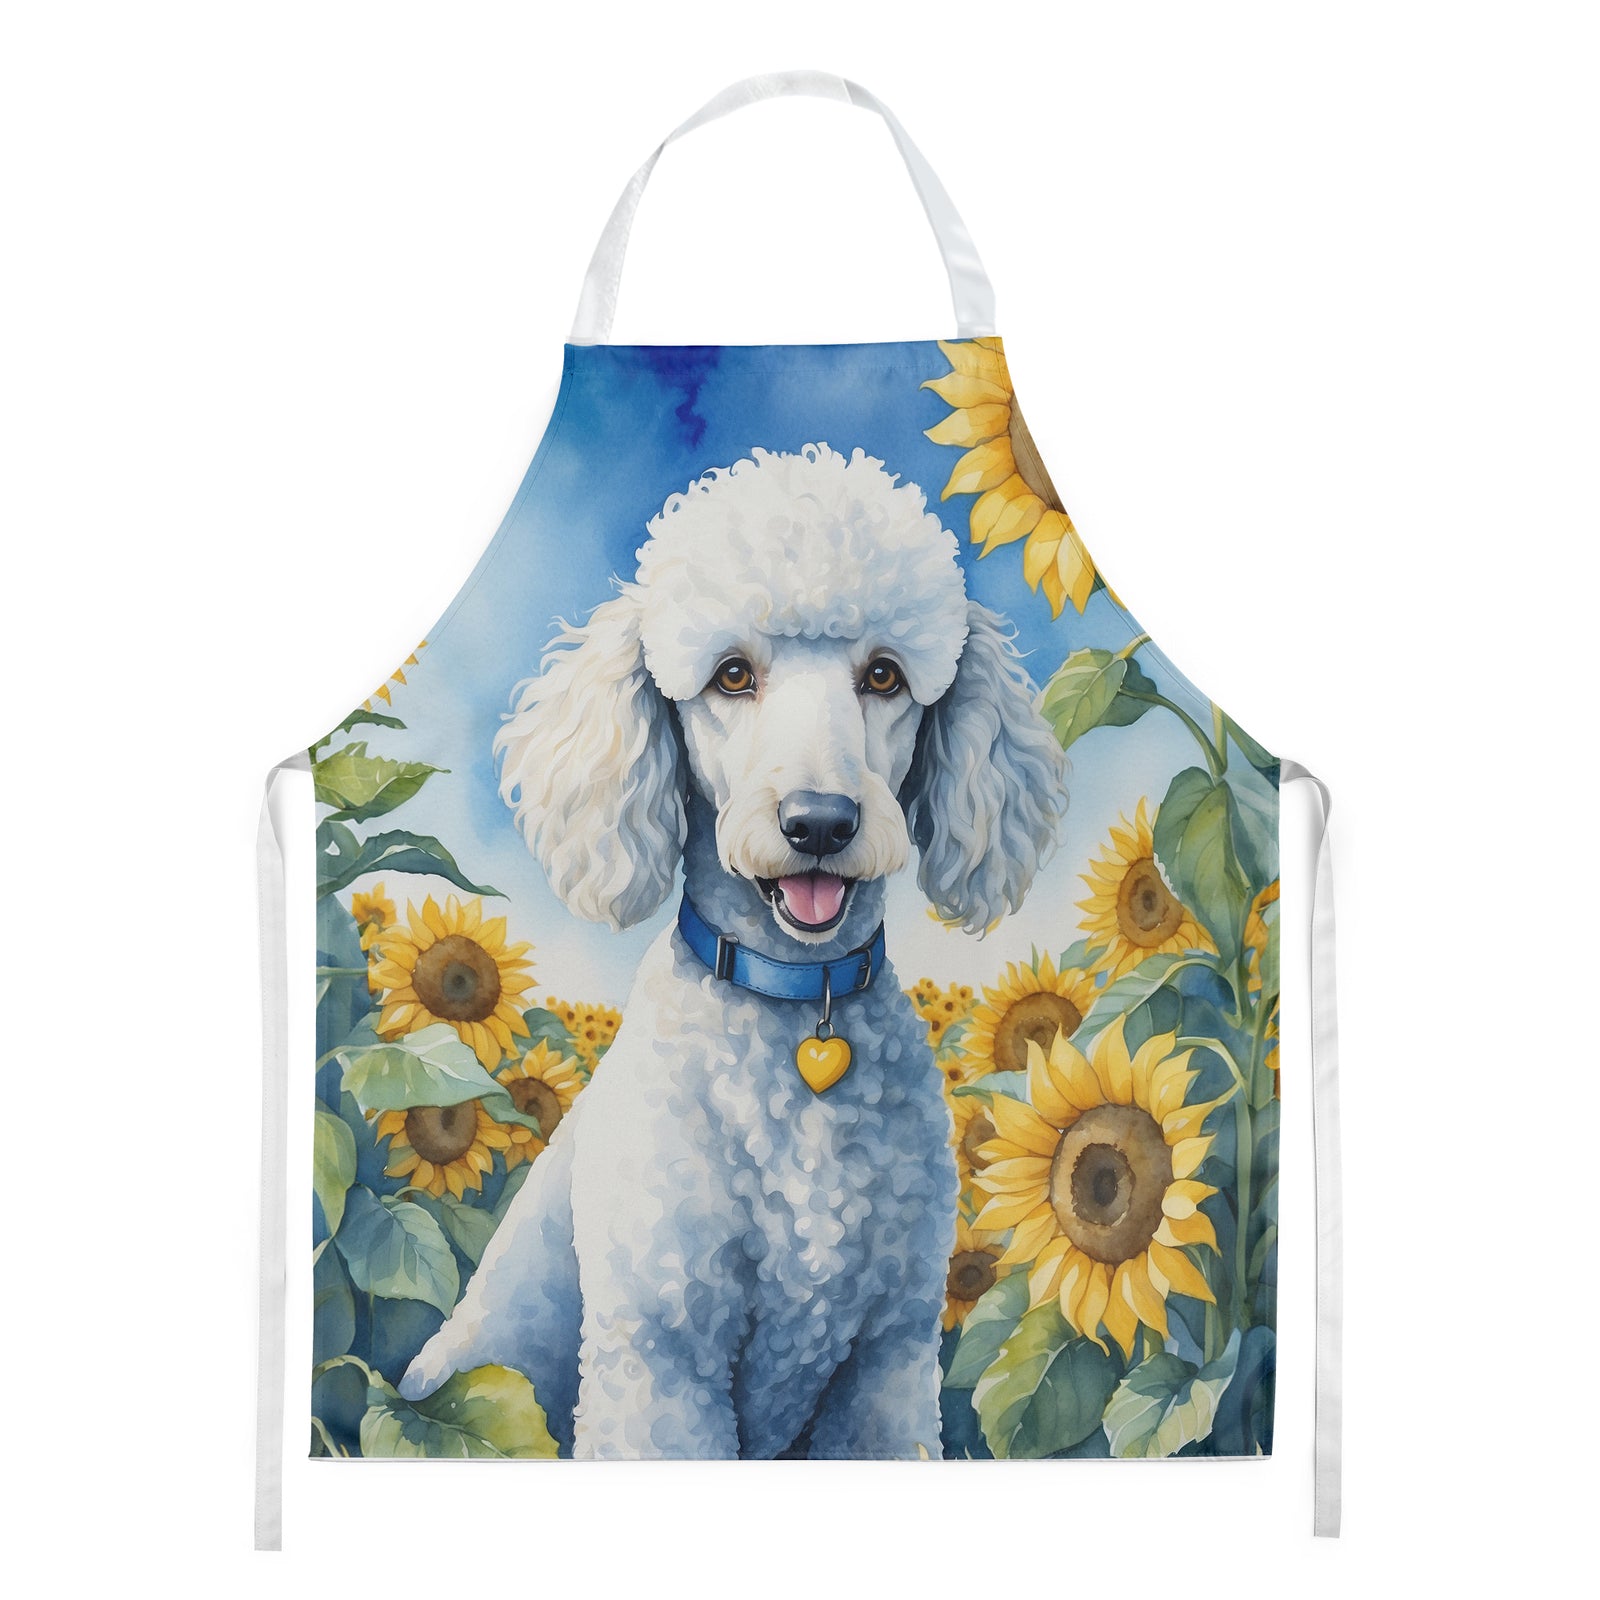 Buy this White Poodle in Sunflowers Apron